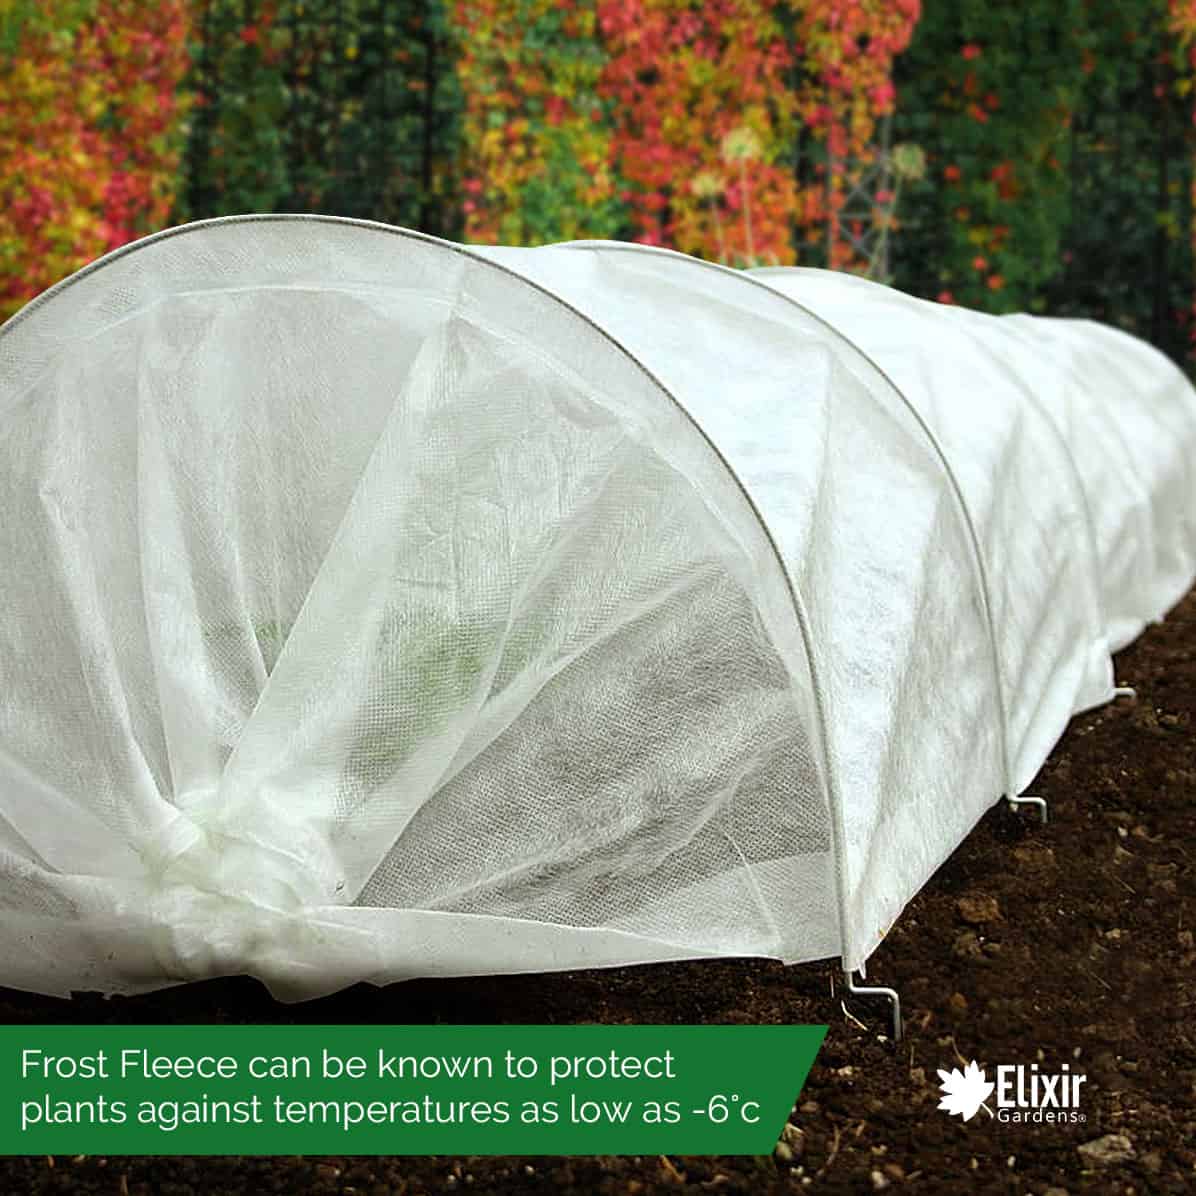 Large 10ft Longx25Widex20High Grown Tunnel for Plants with Dark Green Fleece Cover Guard Seed Germination & Frost Protection Cover,Plant Cover &Frost Blanket for Season Extension 